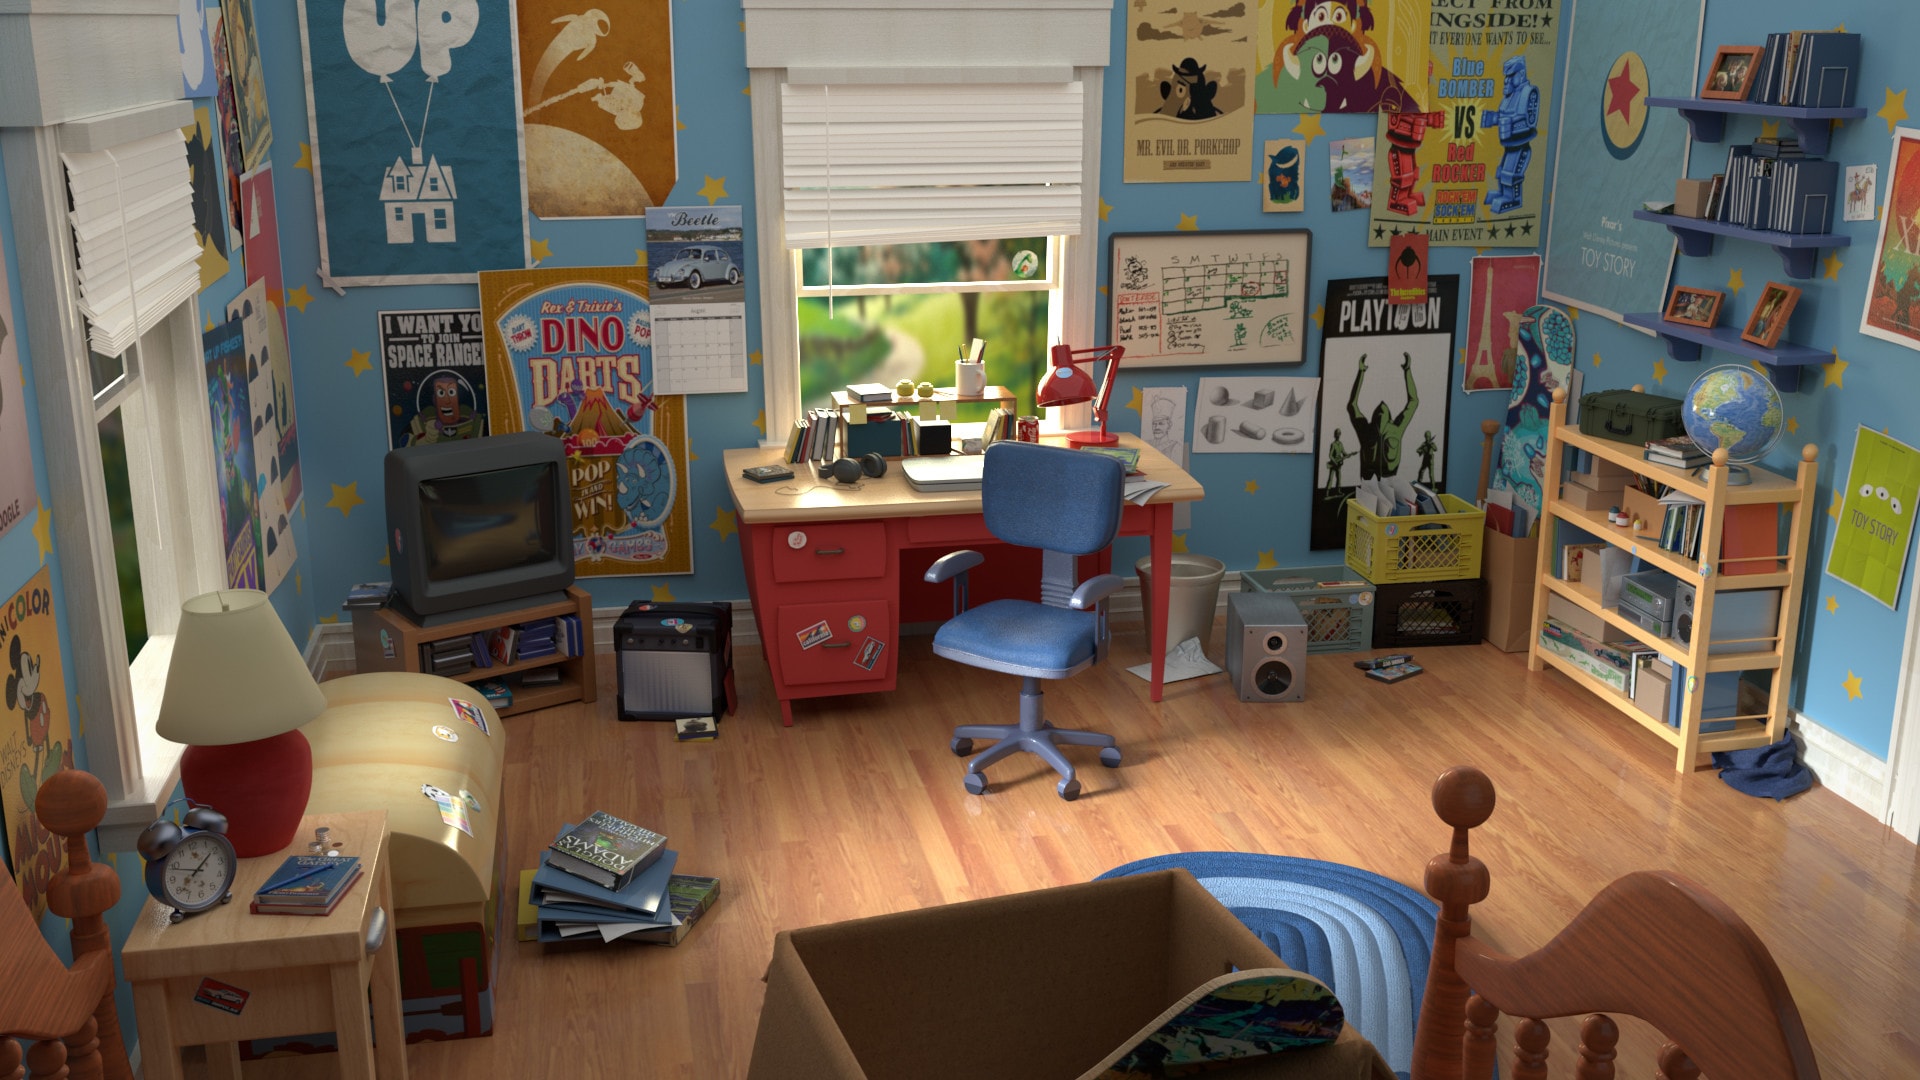 Tokyo Disney Resort Toy Story Hotel - Andy's room in the movie